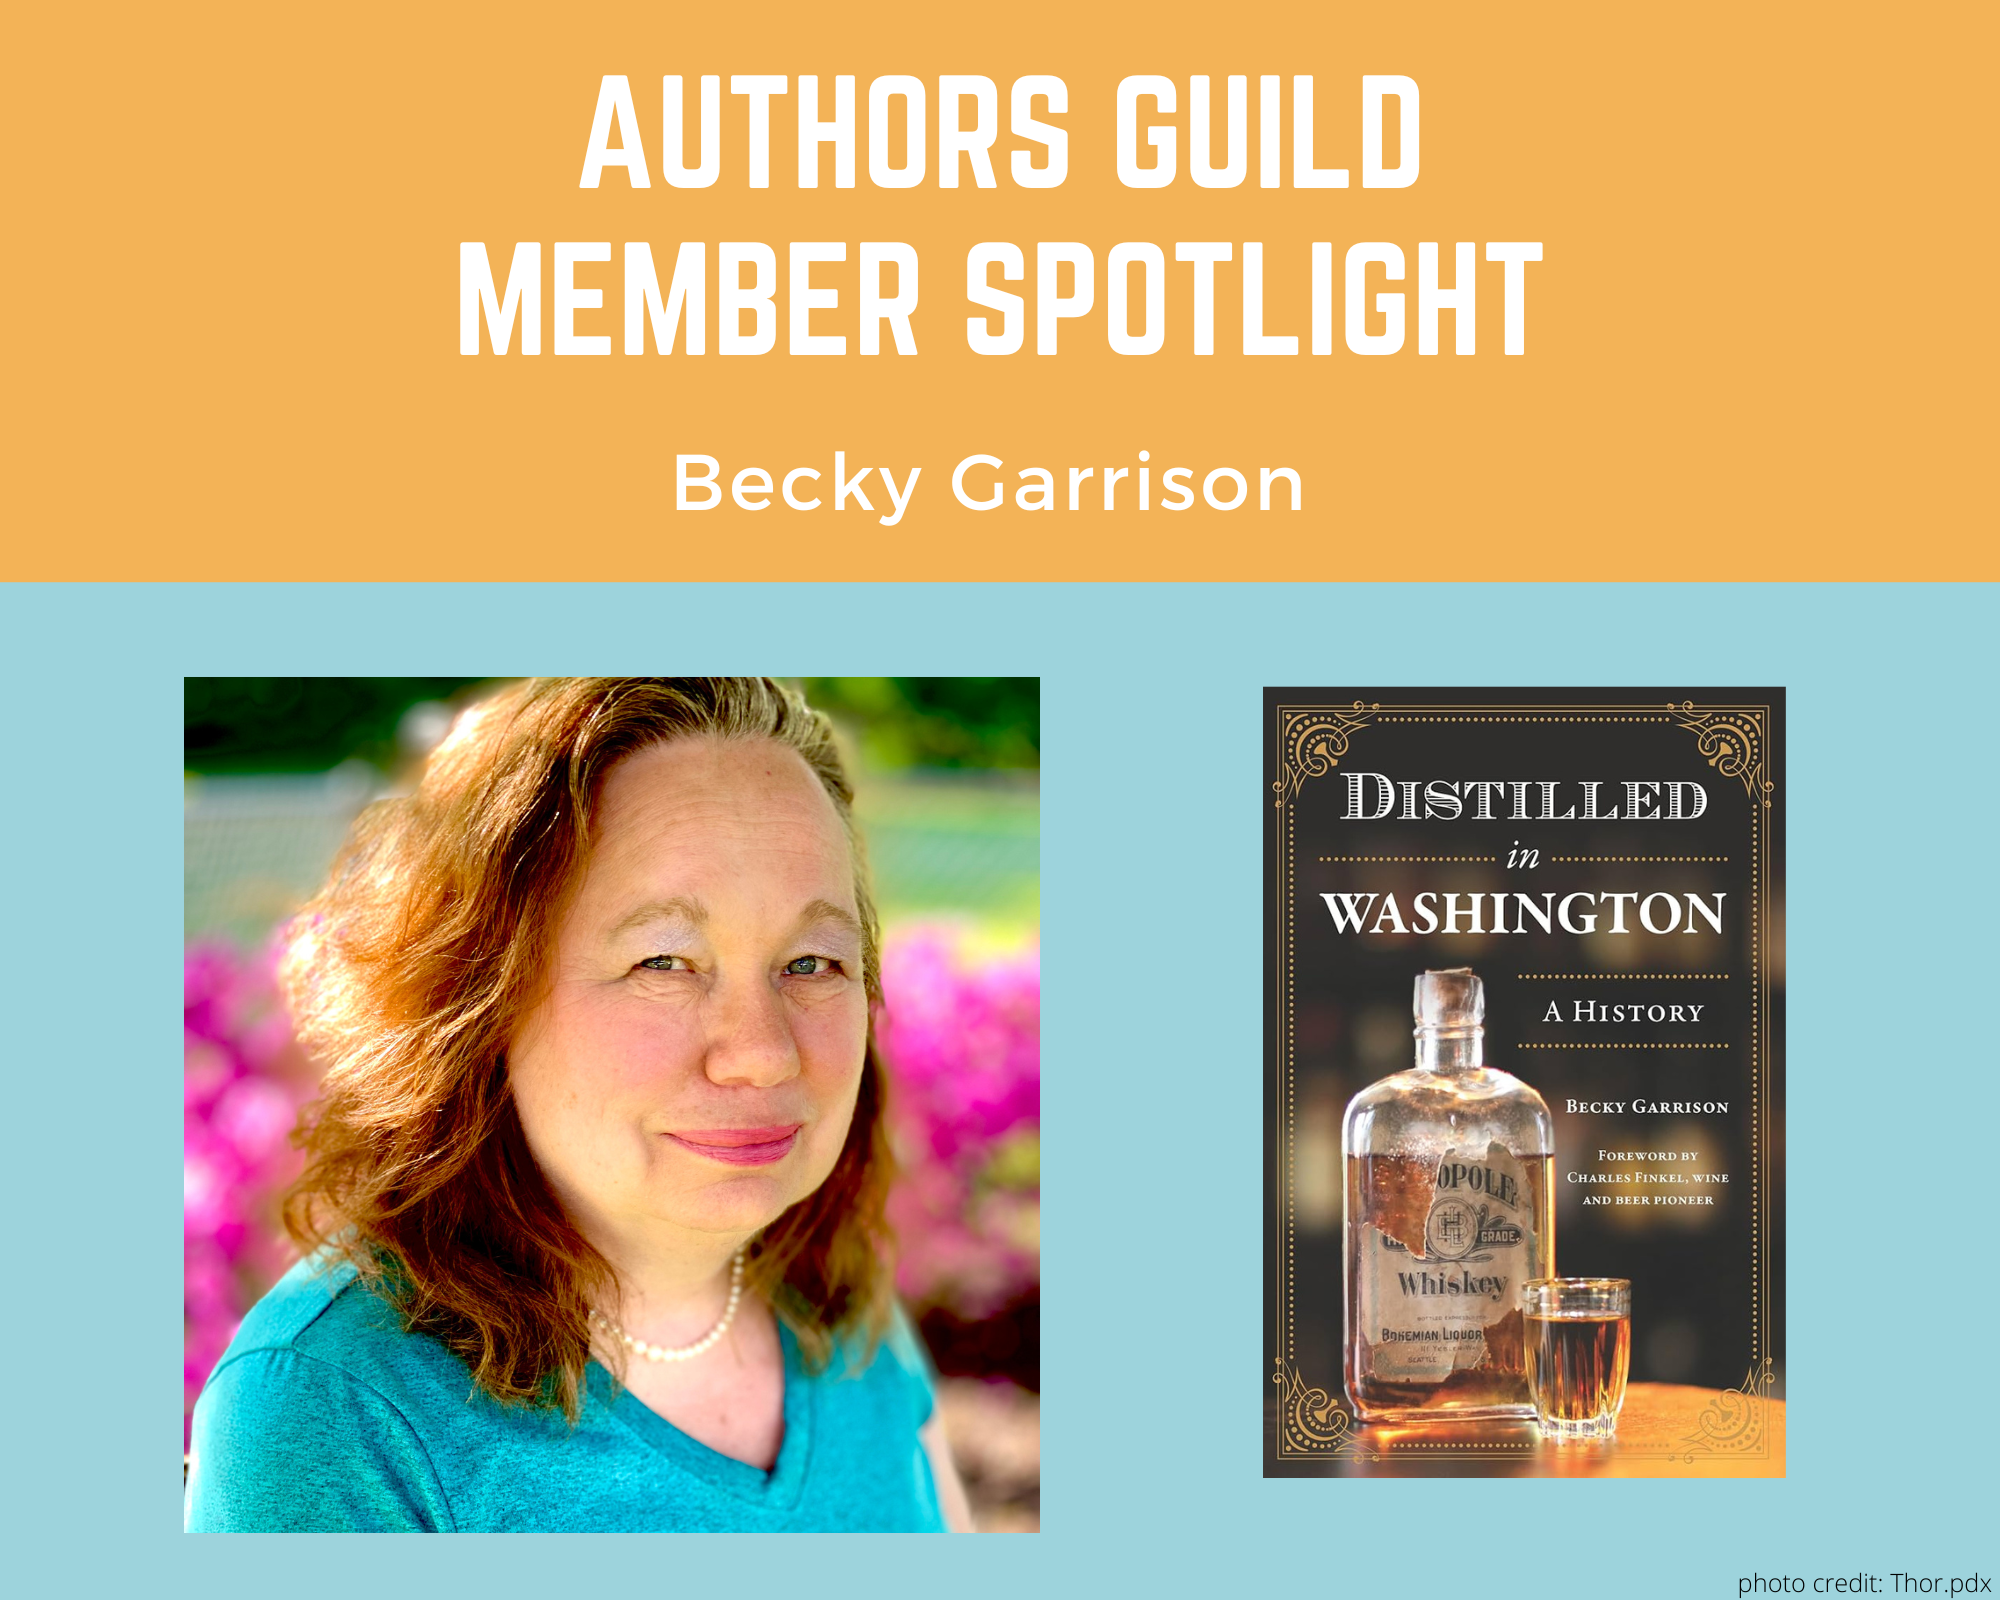 author Becky Garrison and an image of her book Distilled in Washington